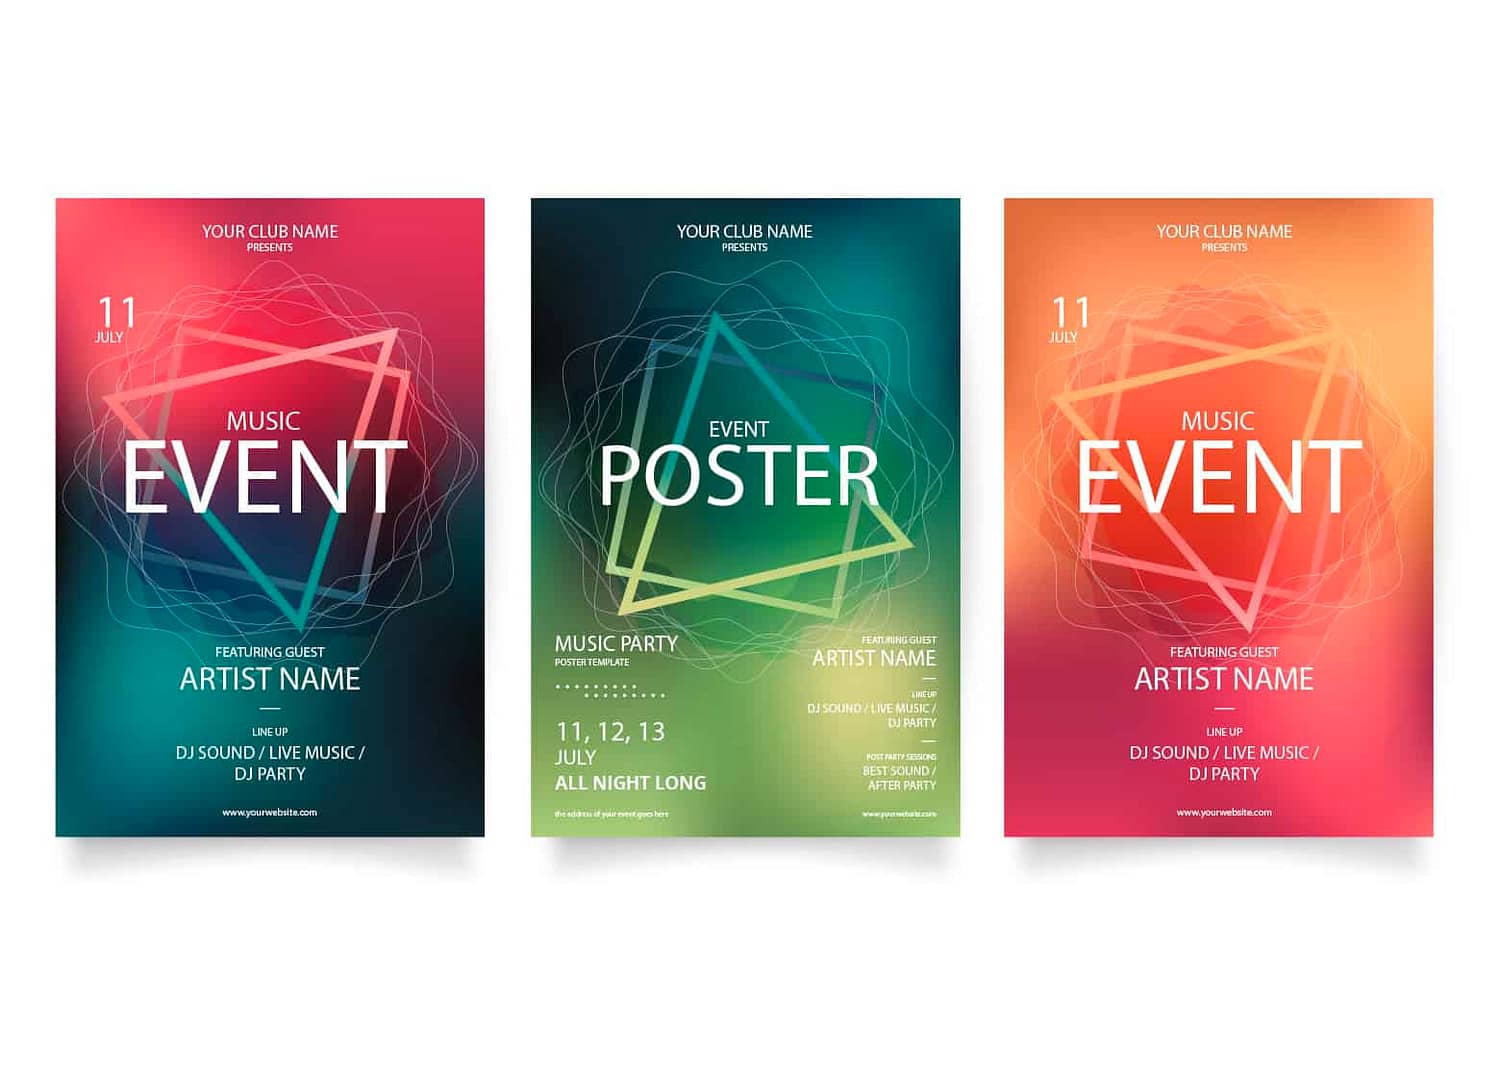 Event poster printing sample 001